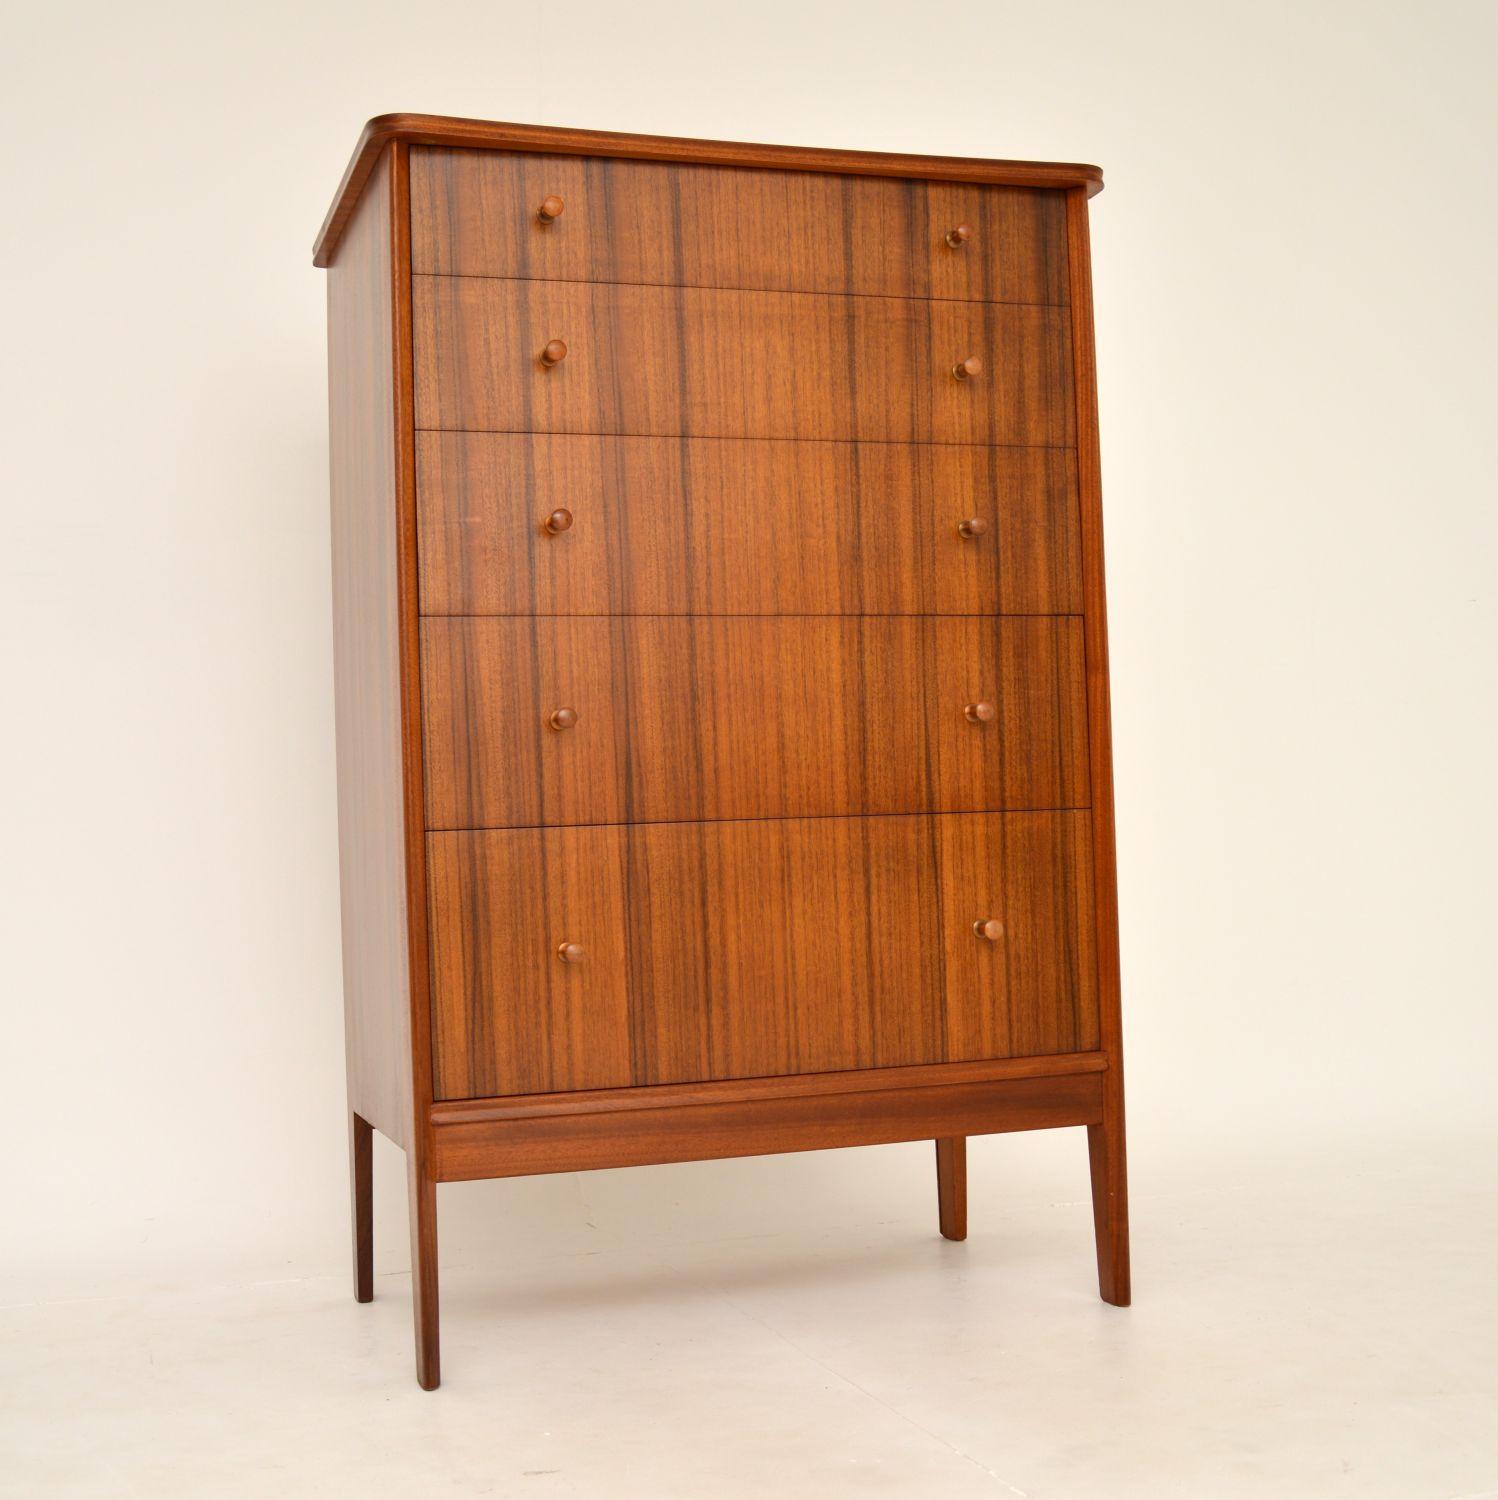 A stylish and very practical large chest of drawers in walnut. This was designed by Peter Hayward for Vanson, it was made in England and dates from the 1950-60’s.

It is of excellent quality, is beautifully styled and has lots of storage space in